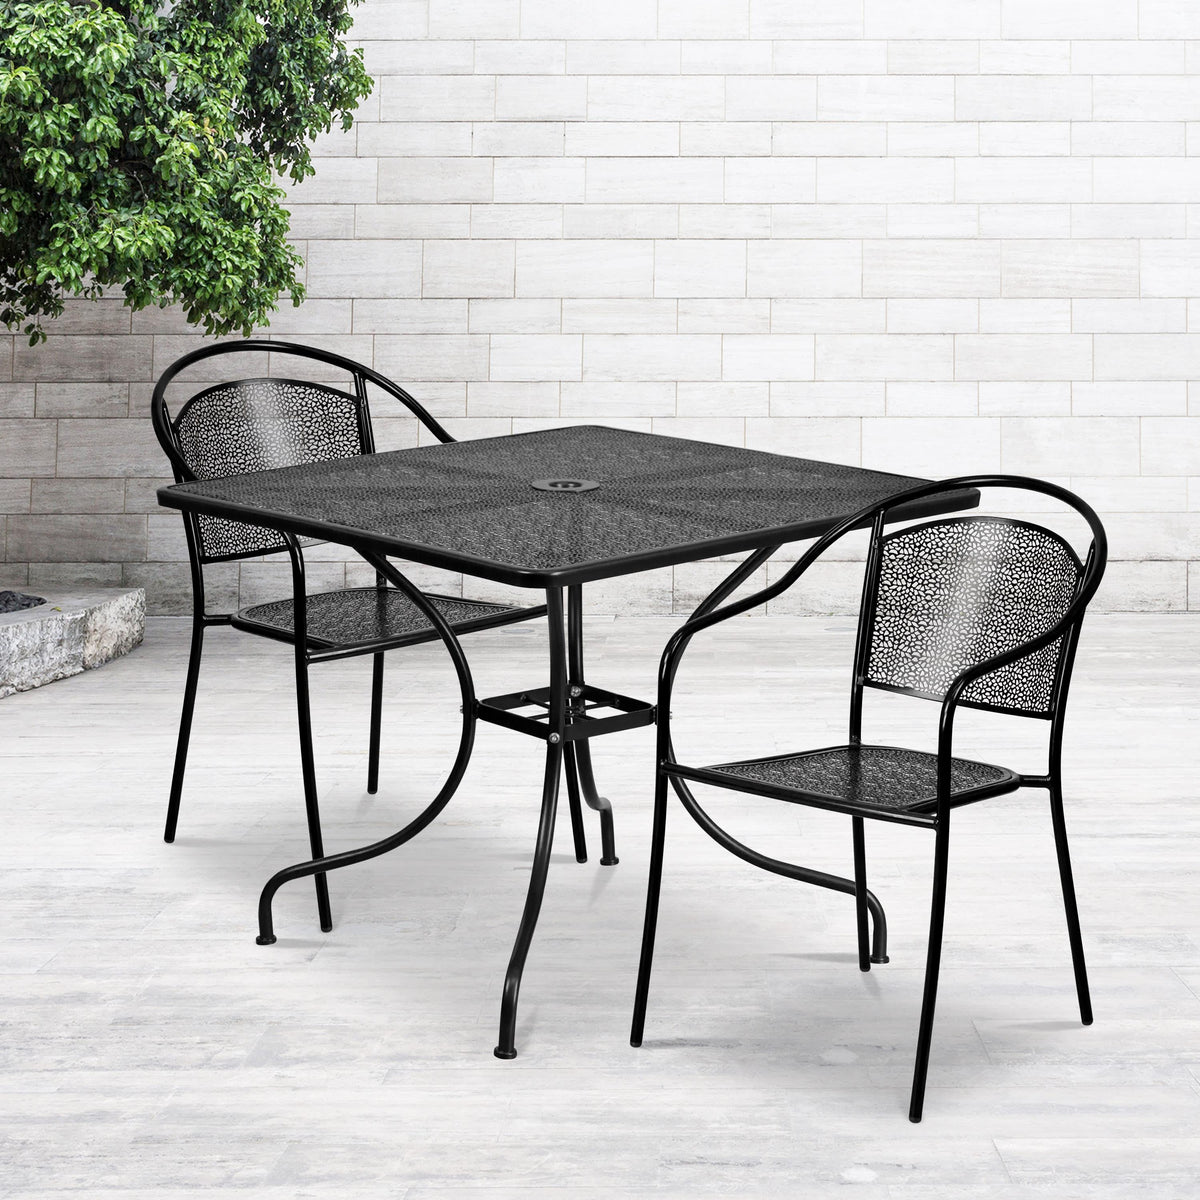 Black |#| 35.5inch Square Black Indoor-Outdoor Steel Patio Table Set w/ 2 Round Back Chairs